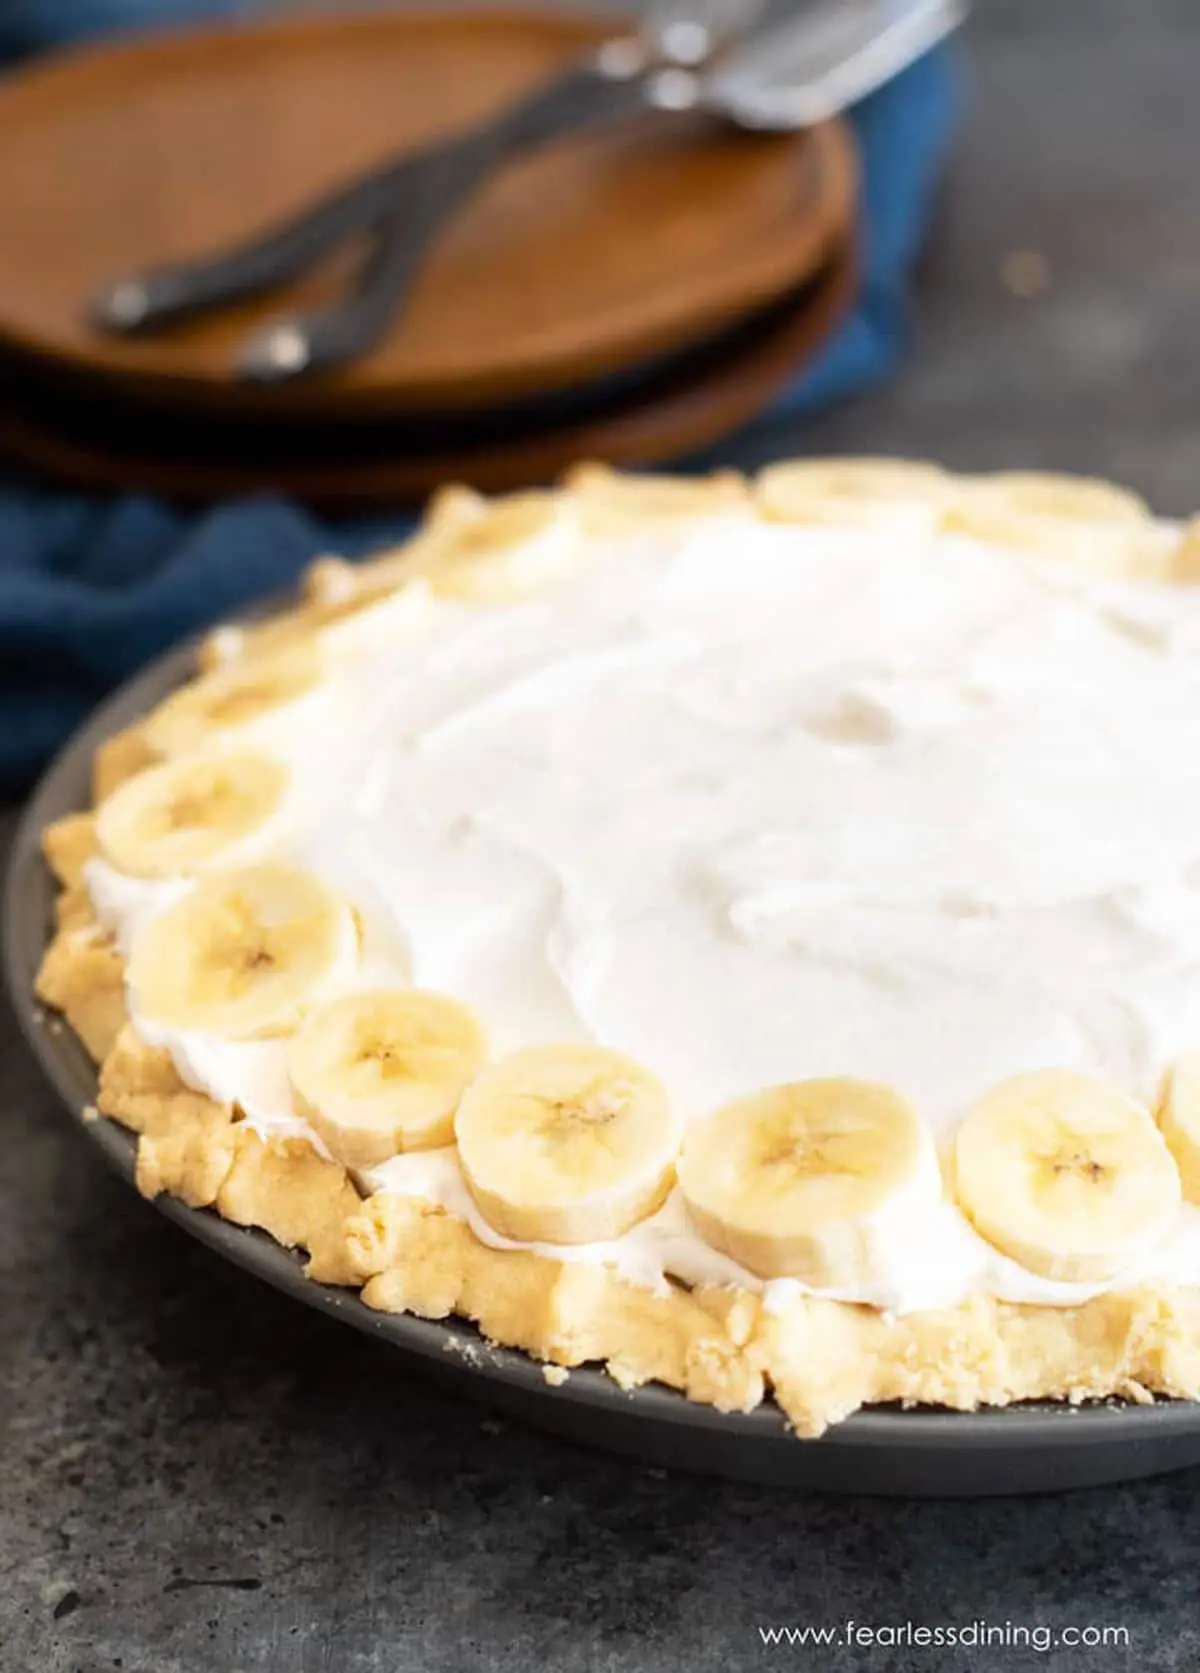 a whole gluten free banana cream pie on a table